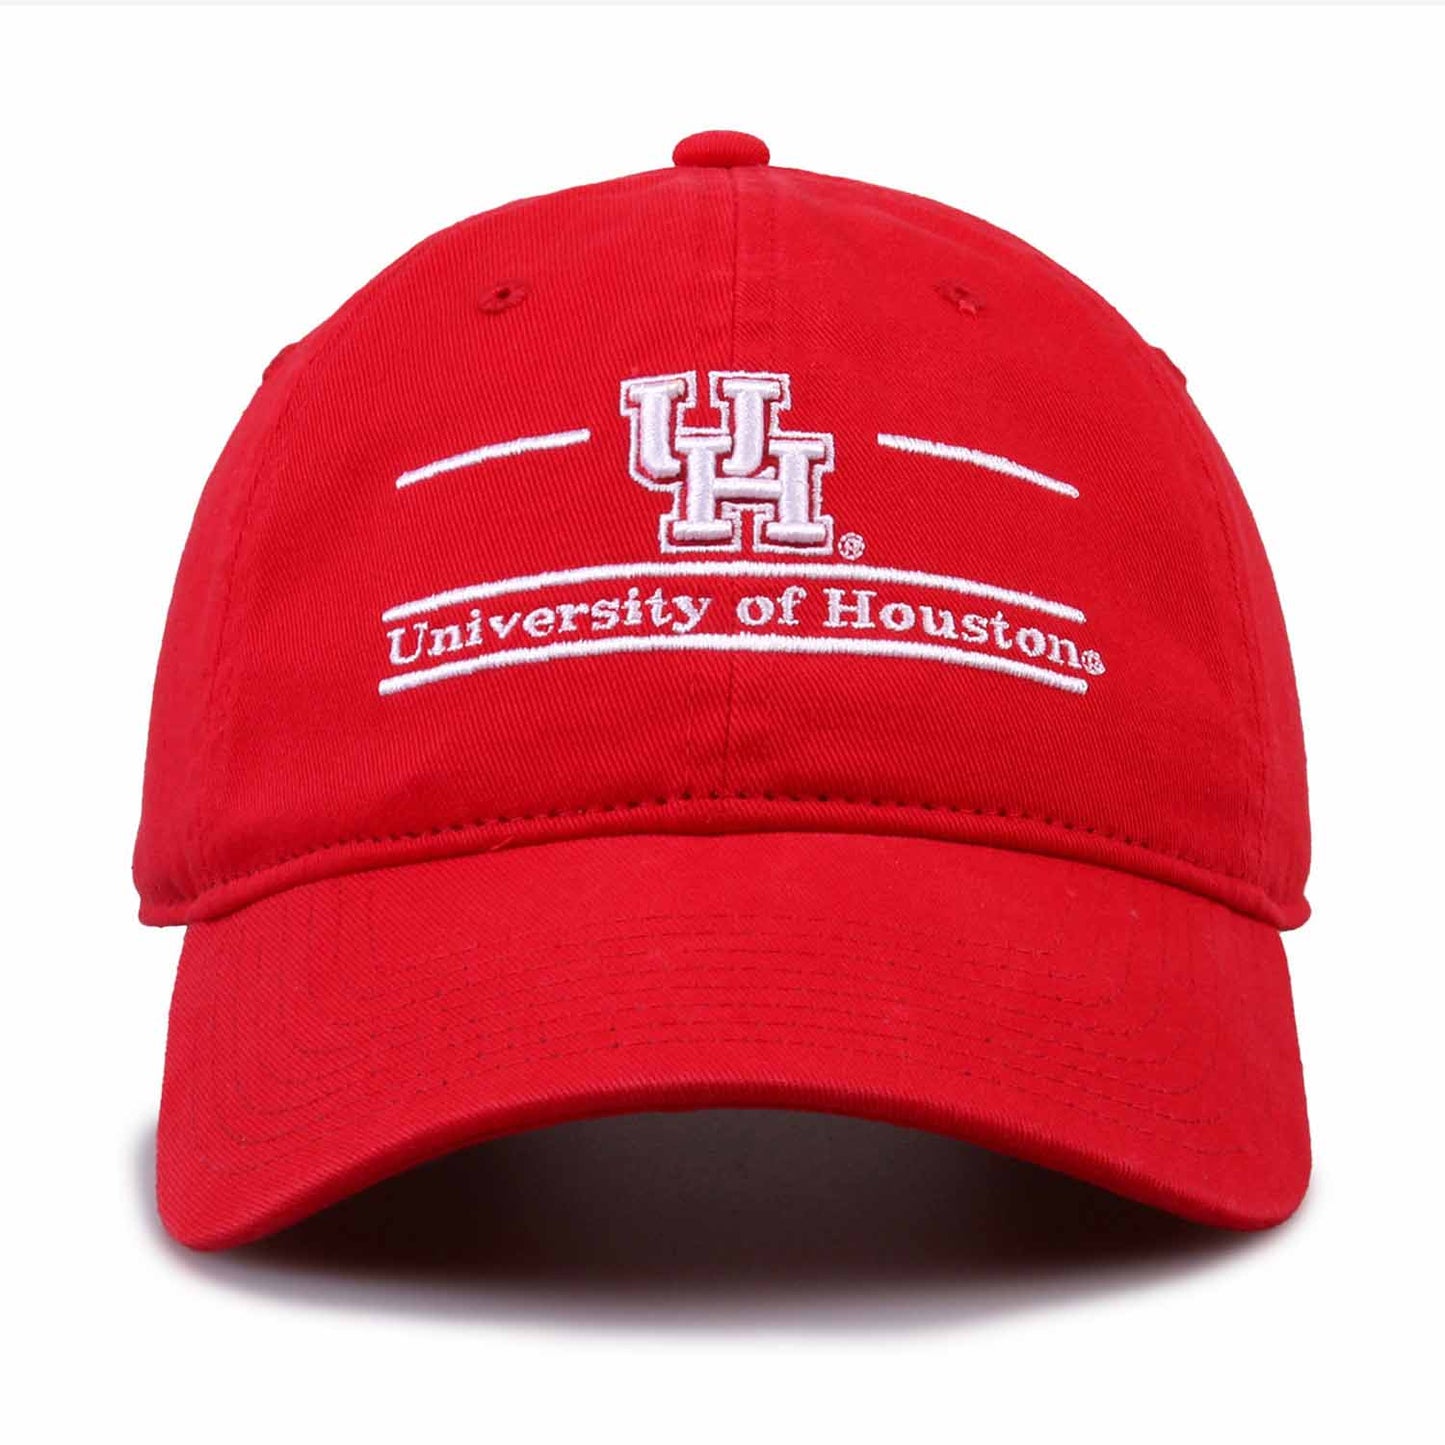 Houston Cougars NCAA Adult Bar Hat - Red